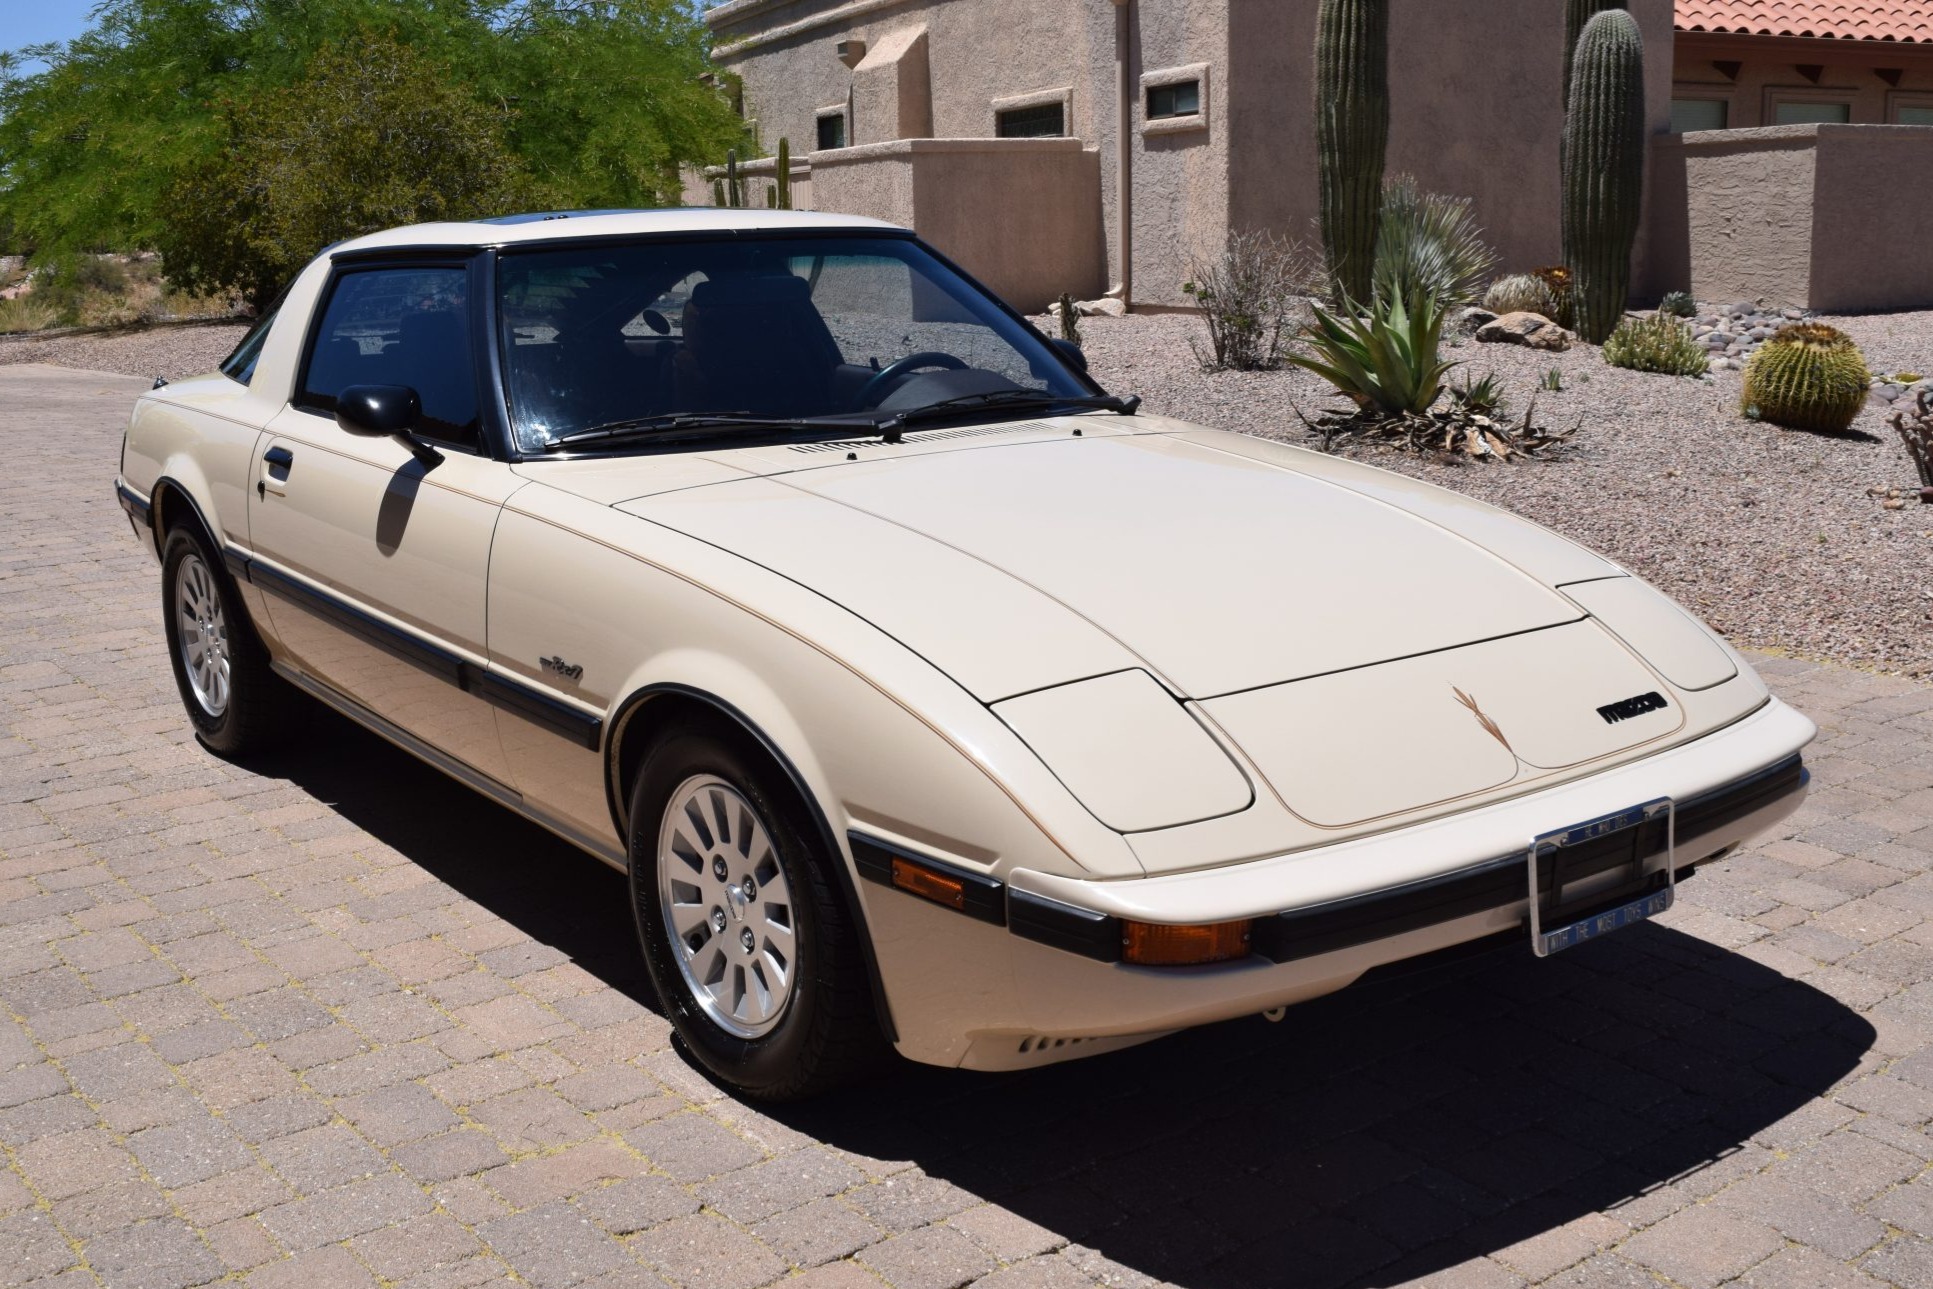 Used Original-Owner 1984 Mazda RX-7 GSL-SE 5-Speed Review